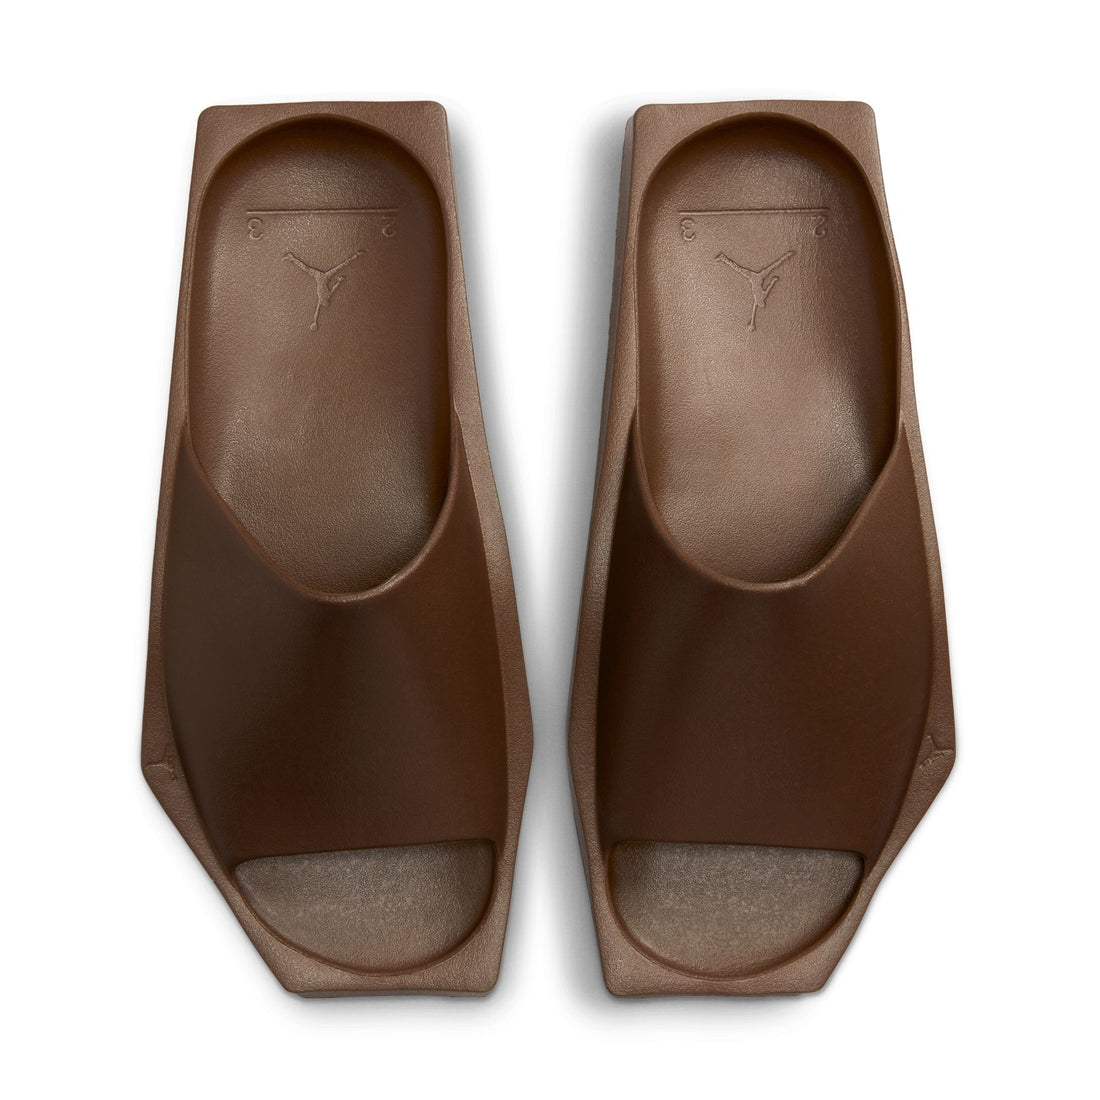 WMNS Jordan Hex Slide (Cacao Wow/Cacao Wow)